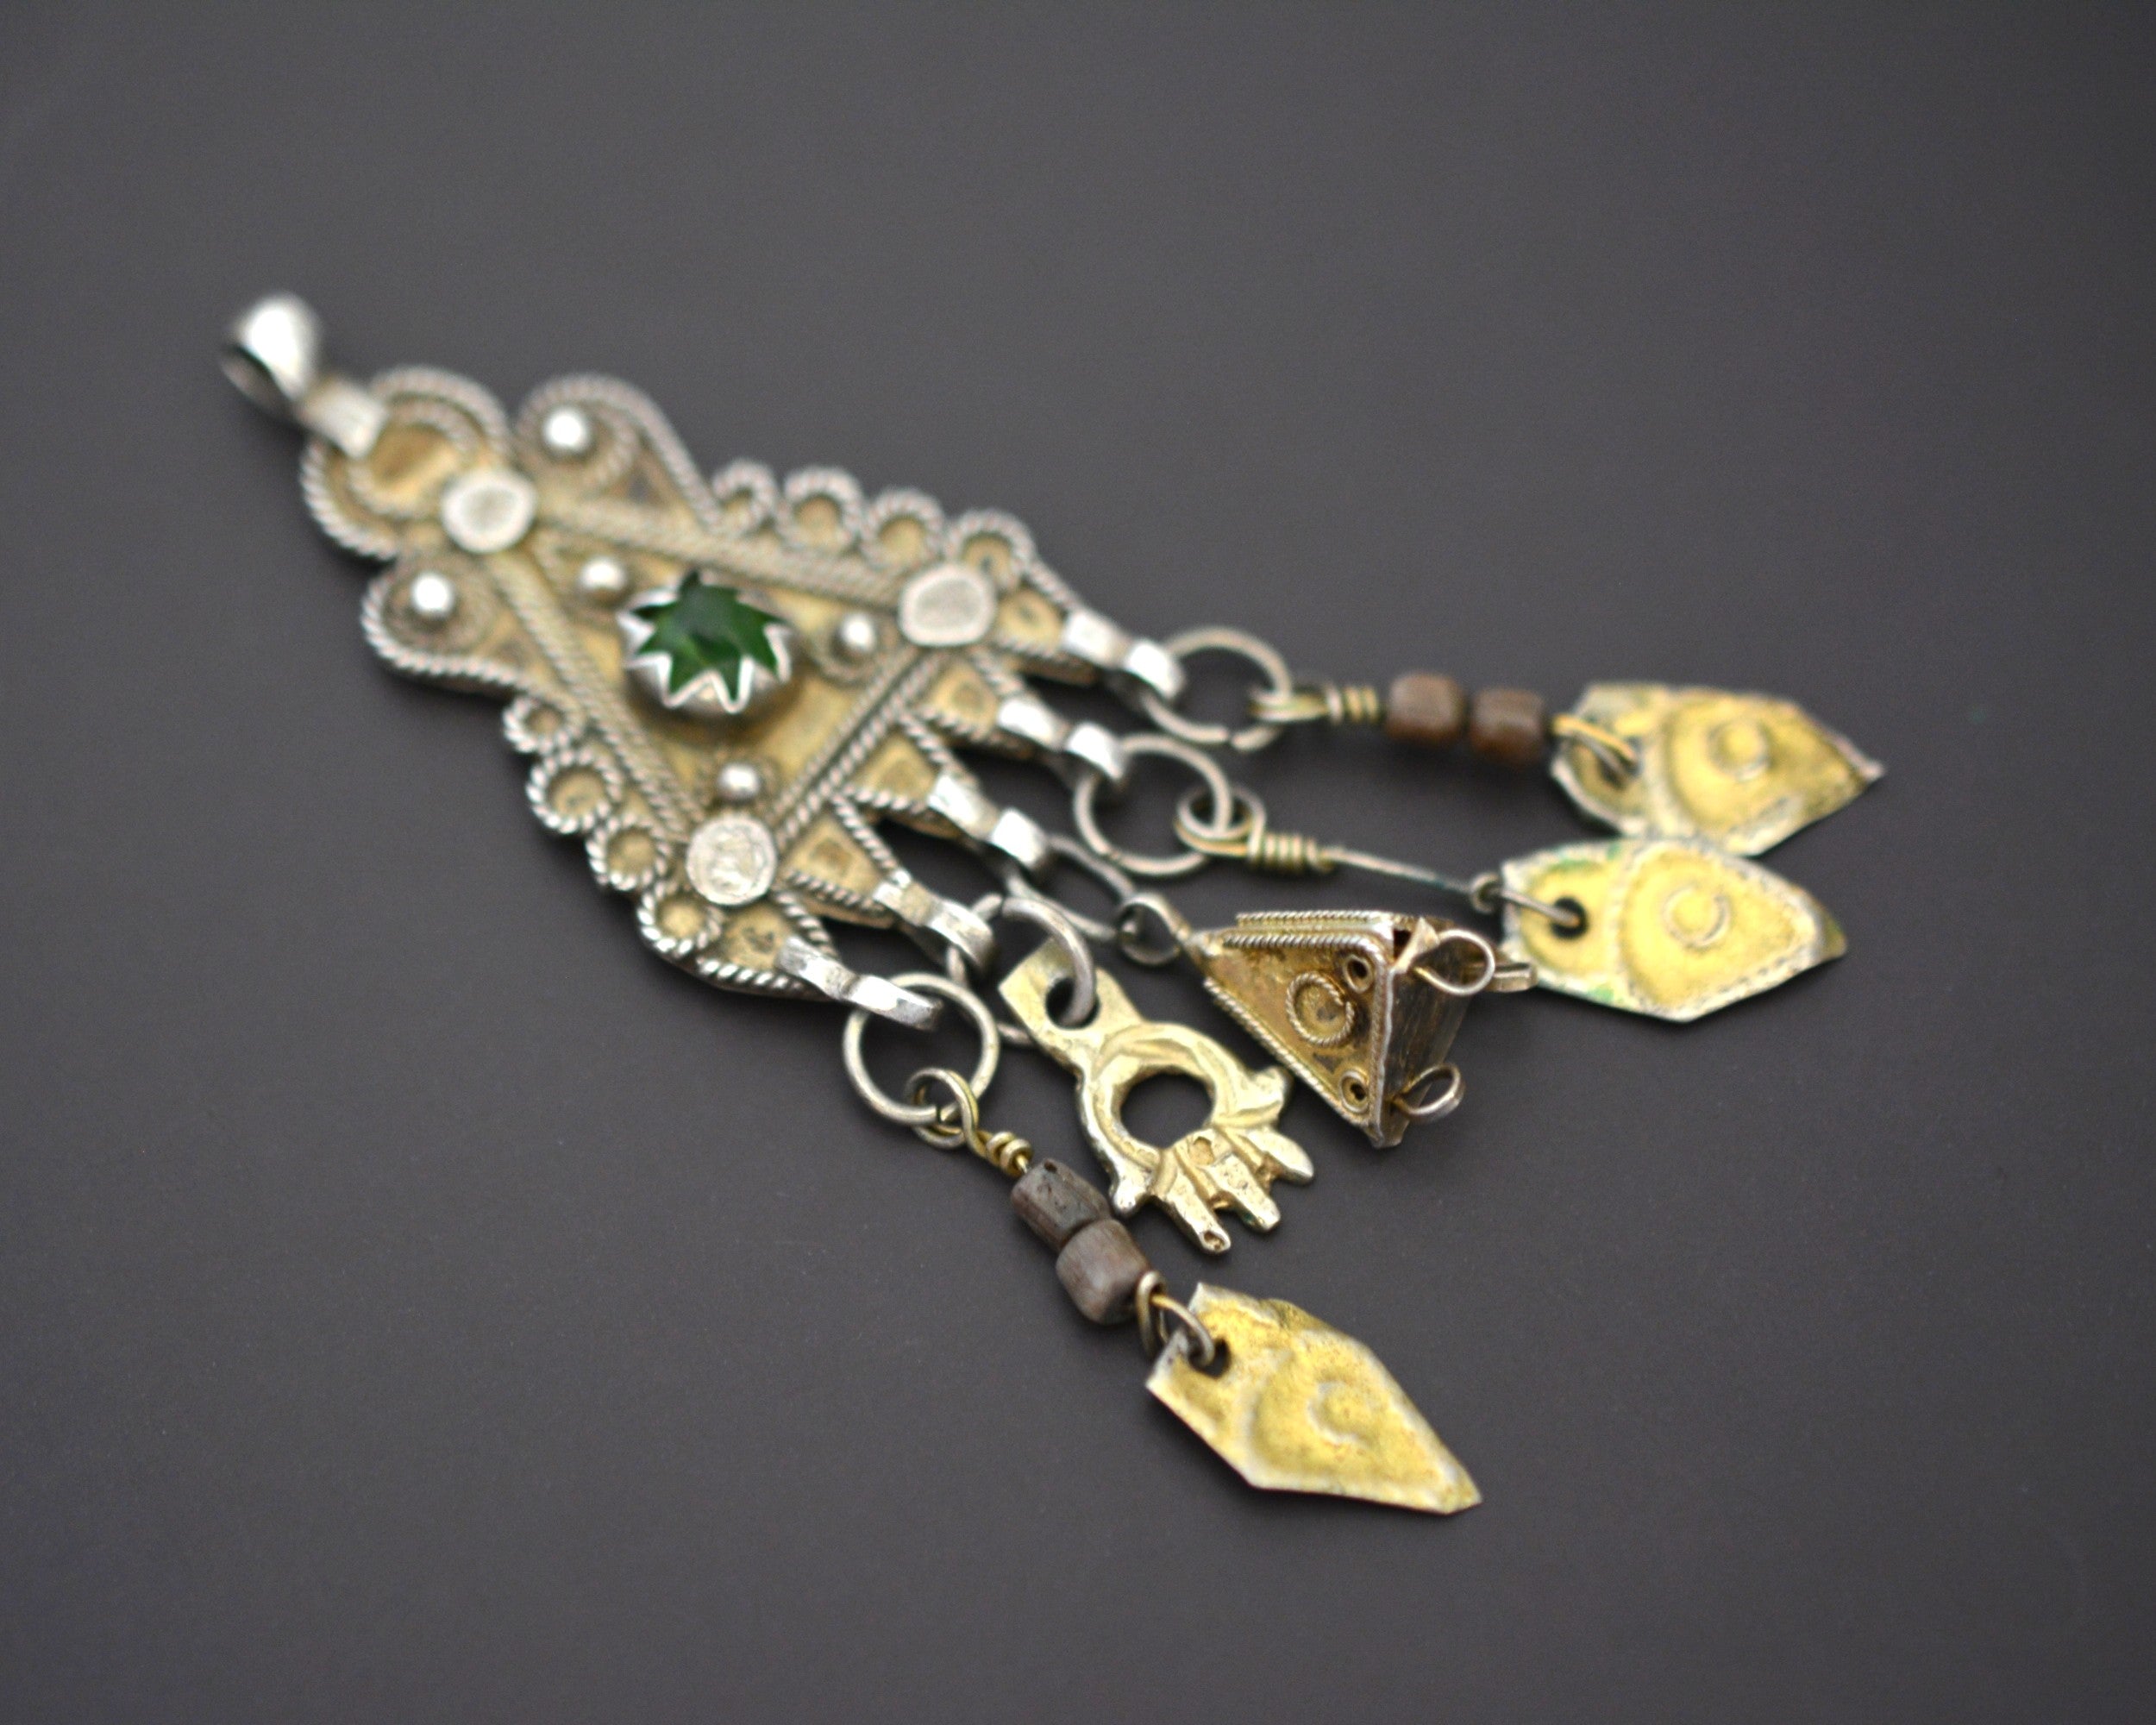 Tunisian Silver Gilded Berber Pendant with Green Glass and Dangles